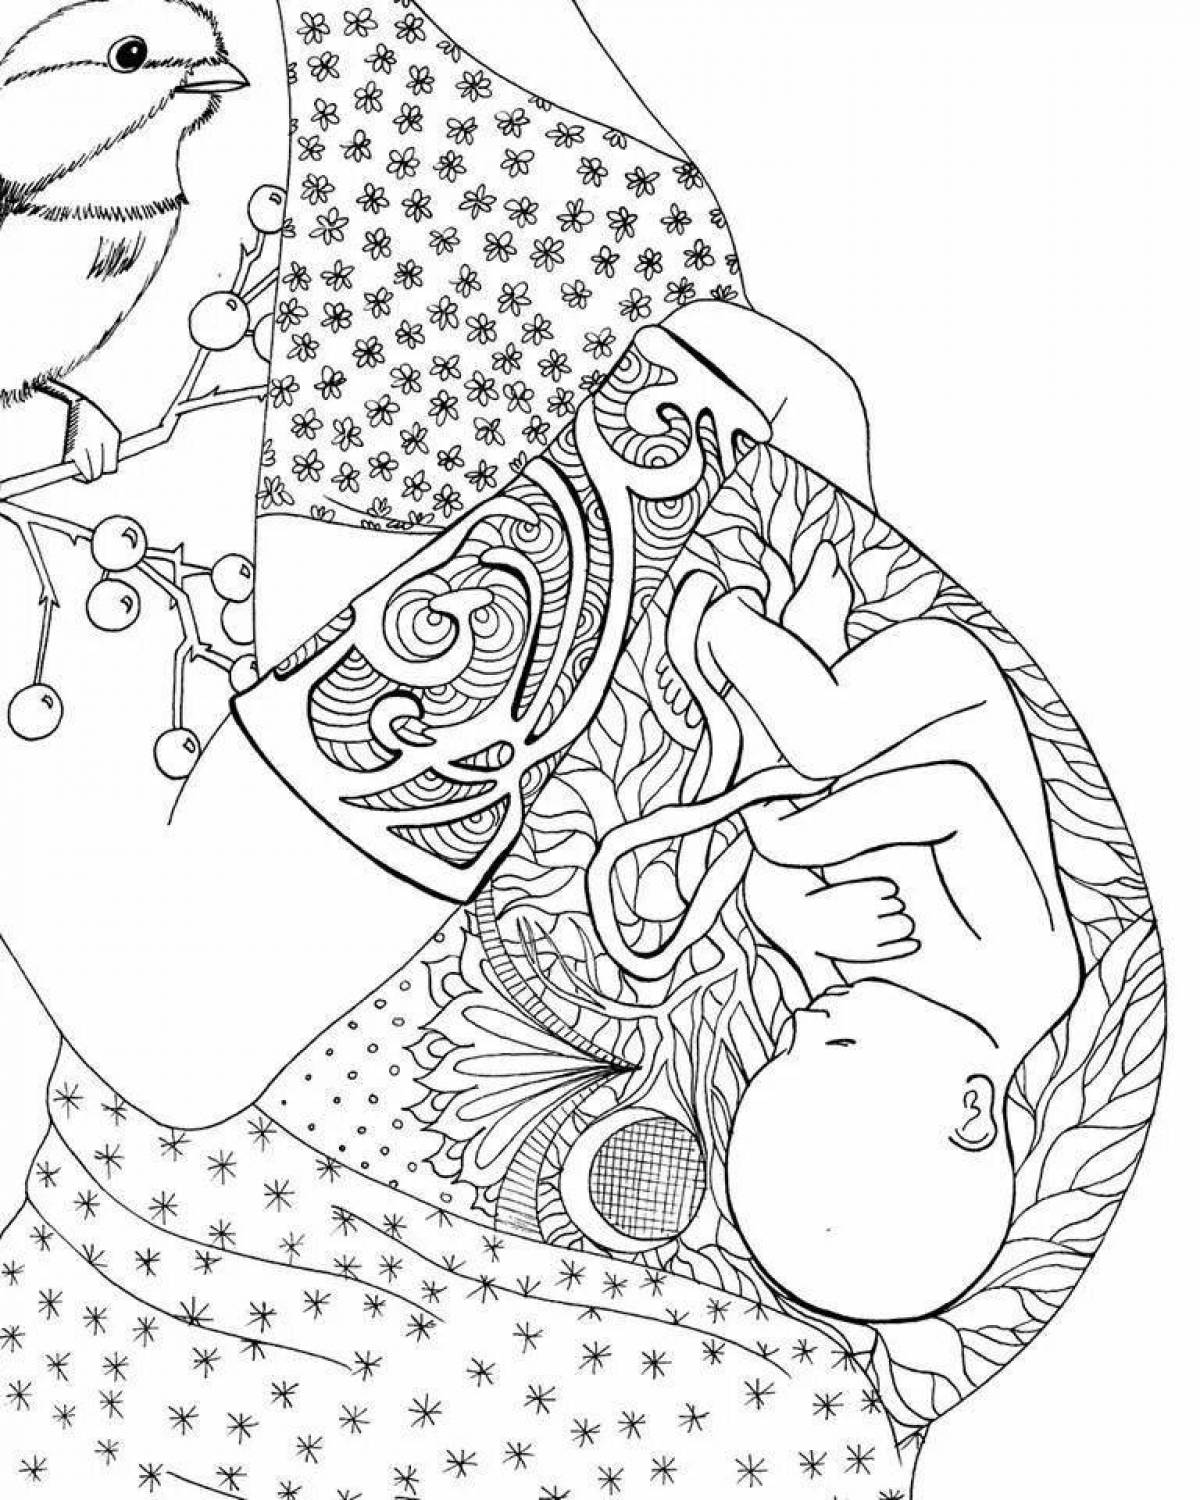 Exquisite coloring of a pregnant woman